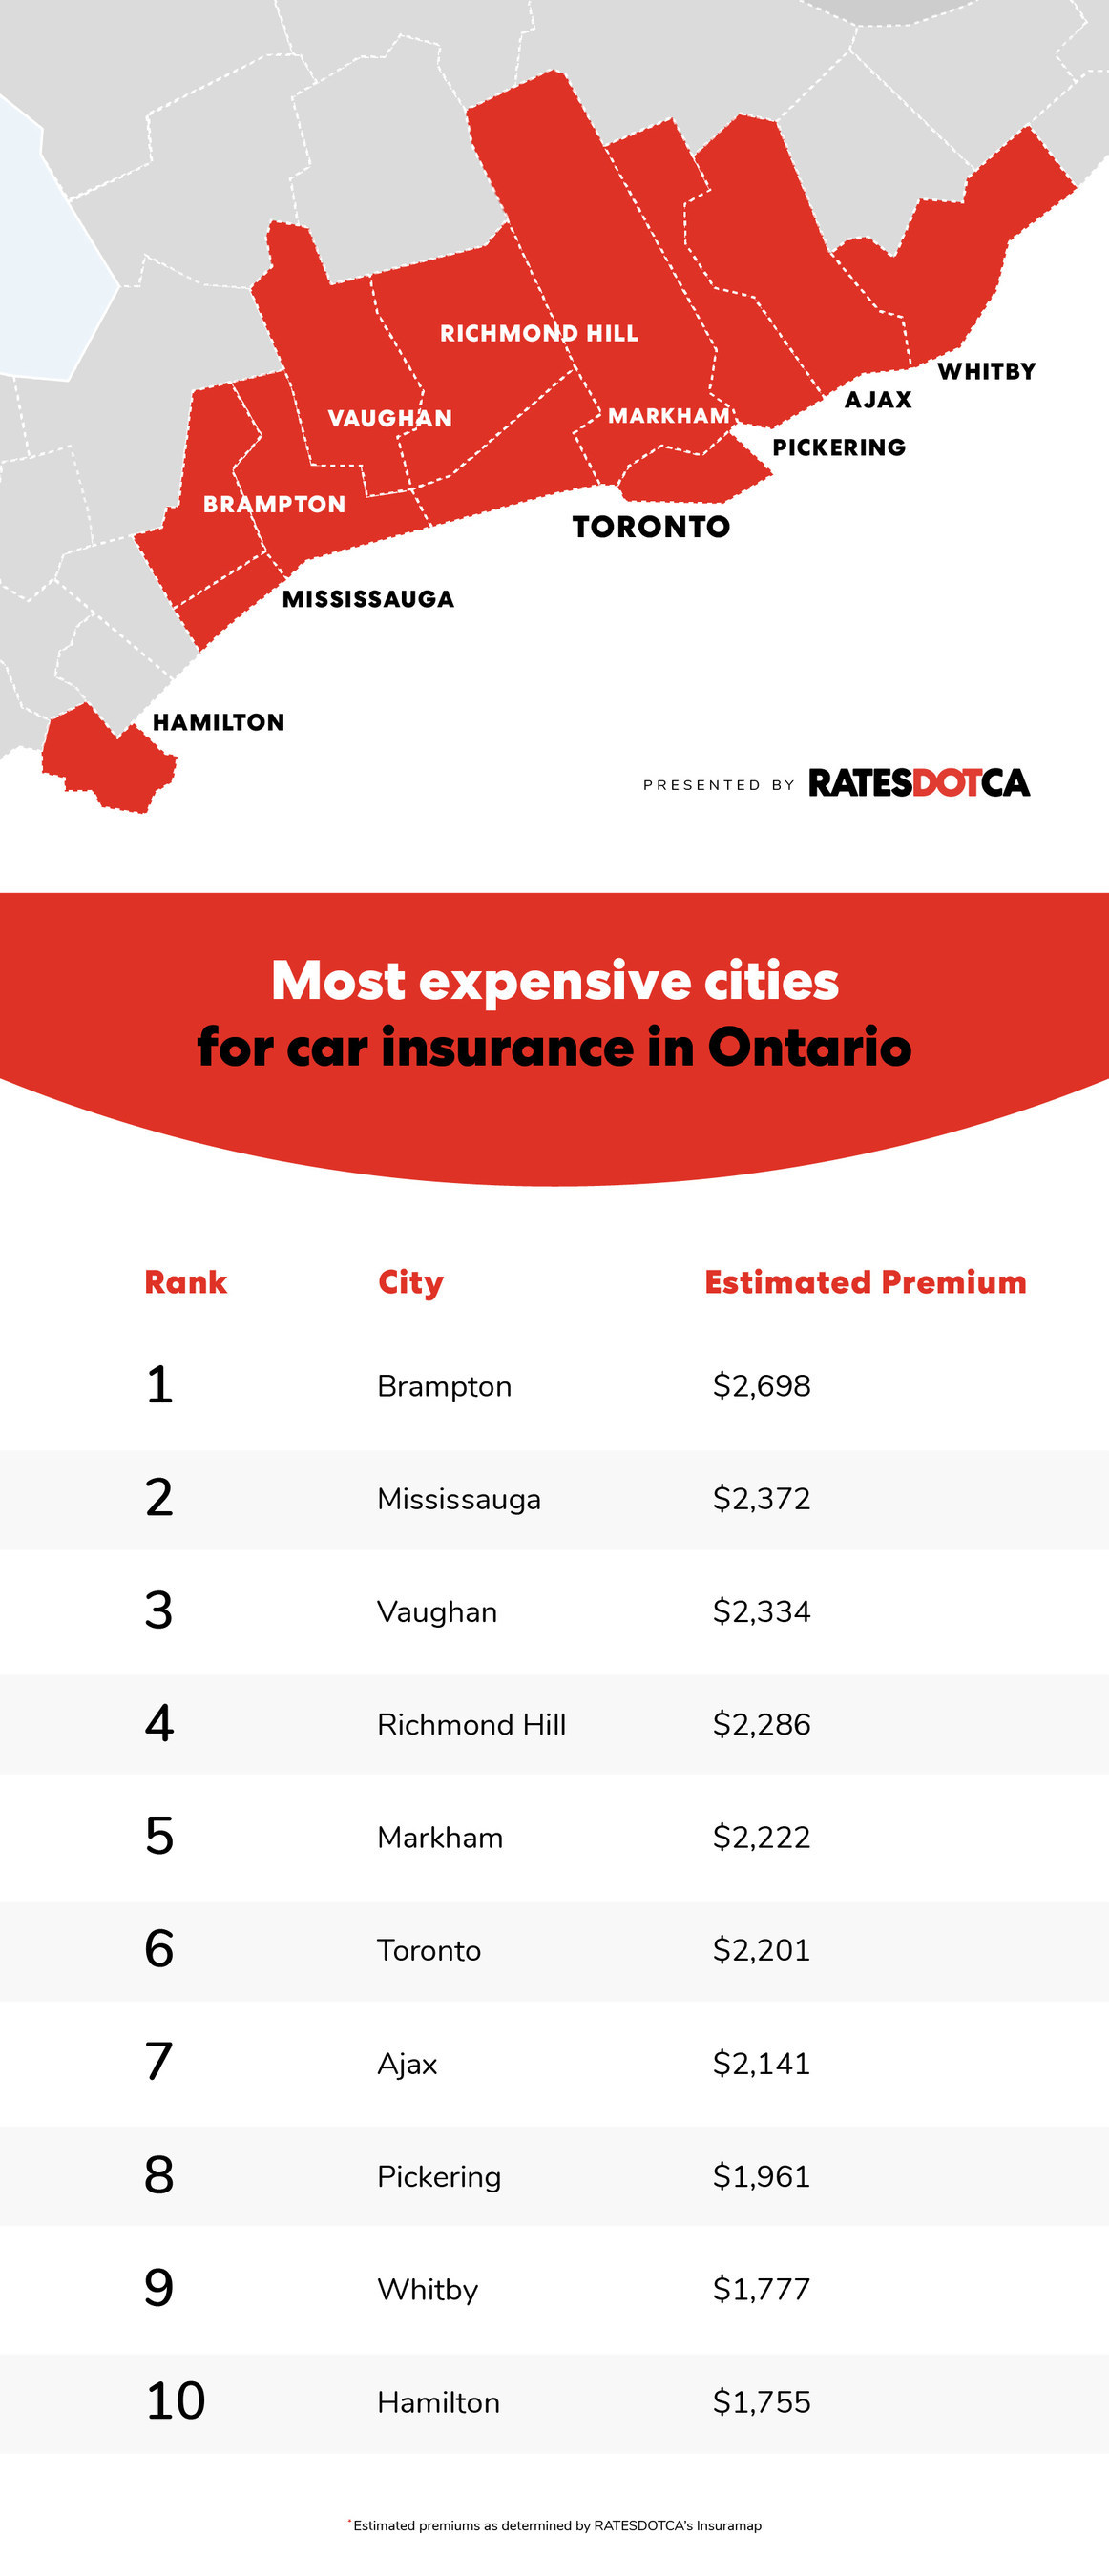 Durham Region cities among highest for car insurance in Ontario